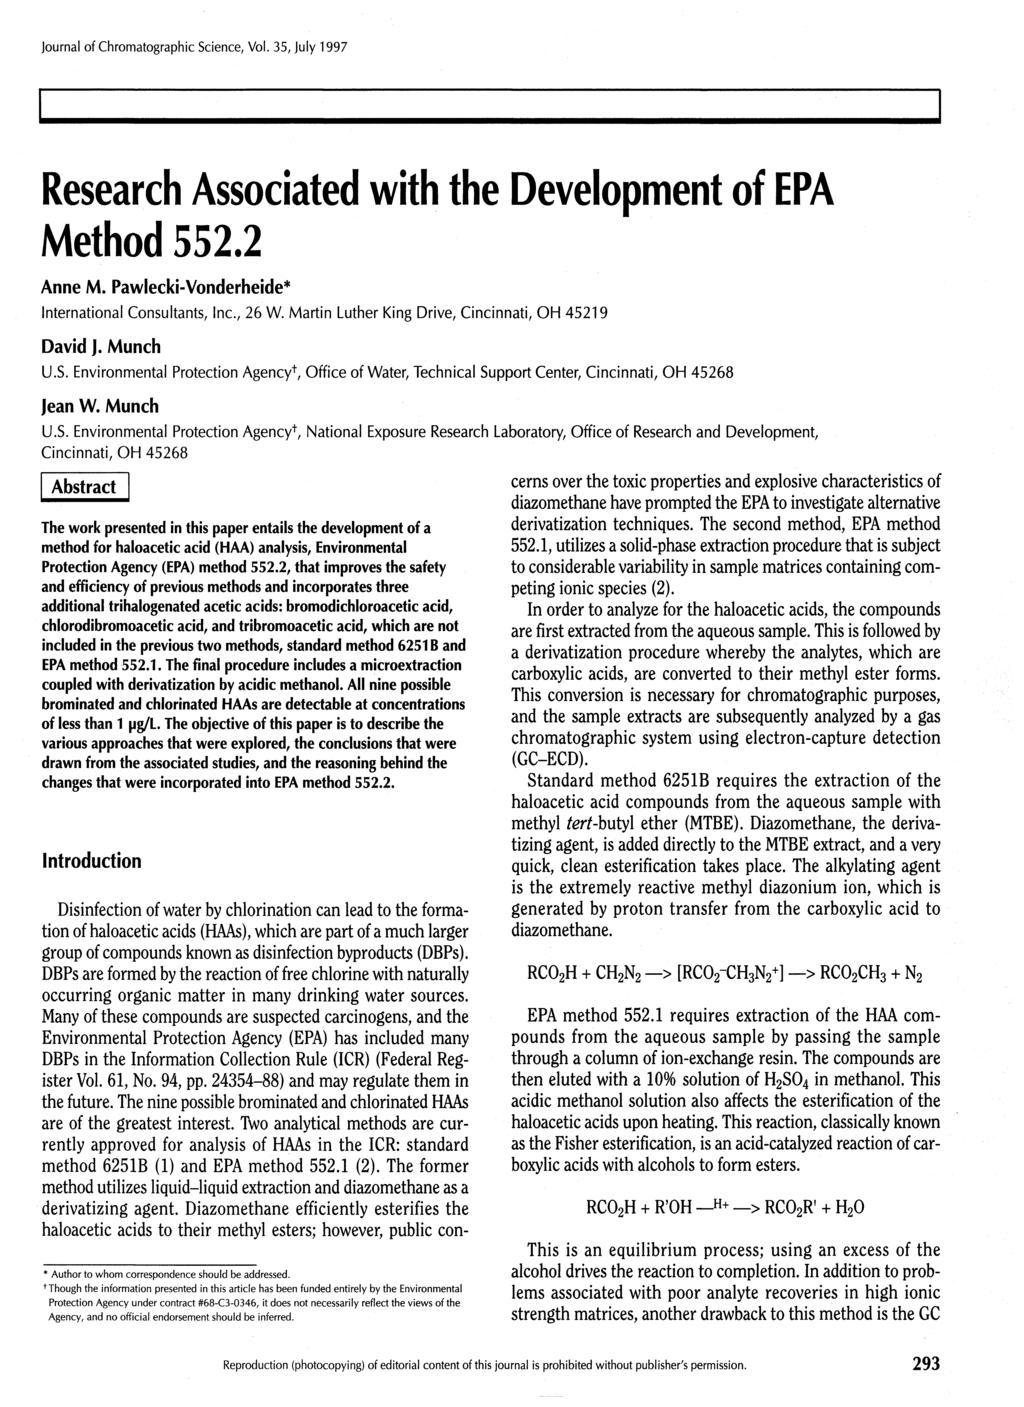 Research Associated with the Development of EPA Method 552.